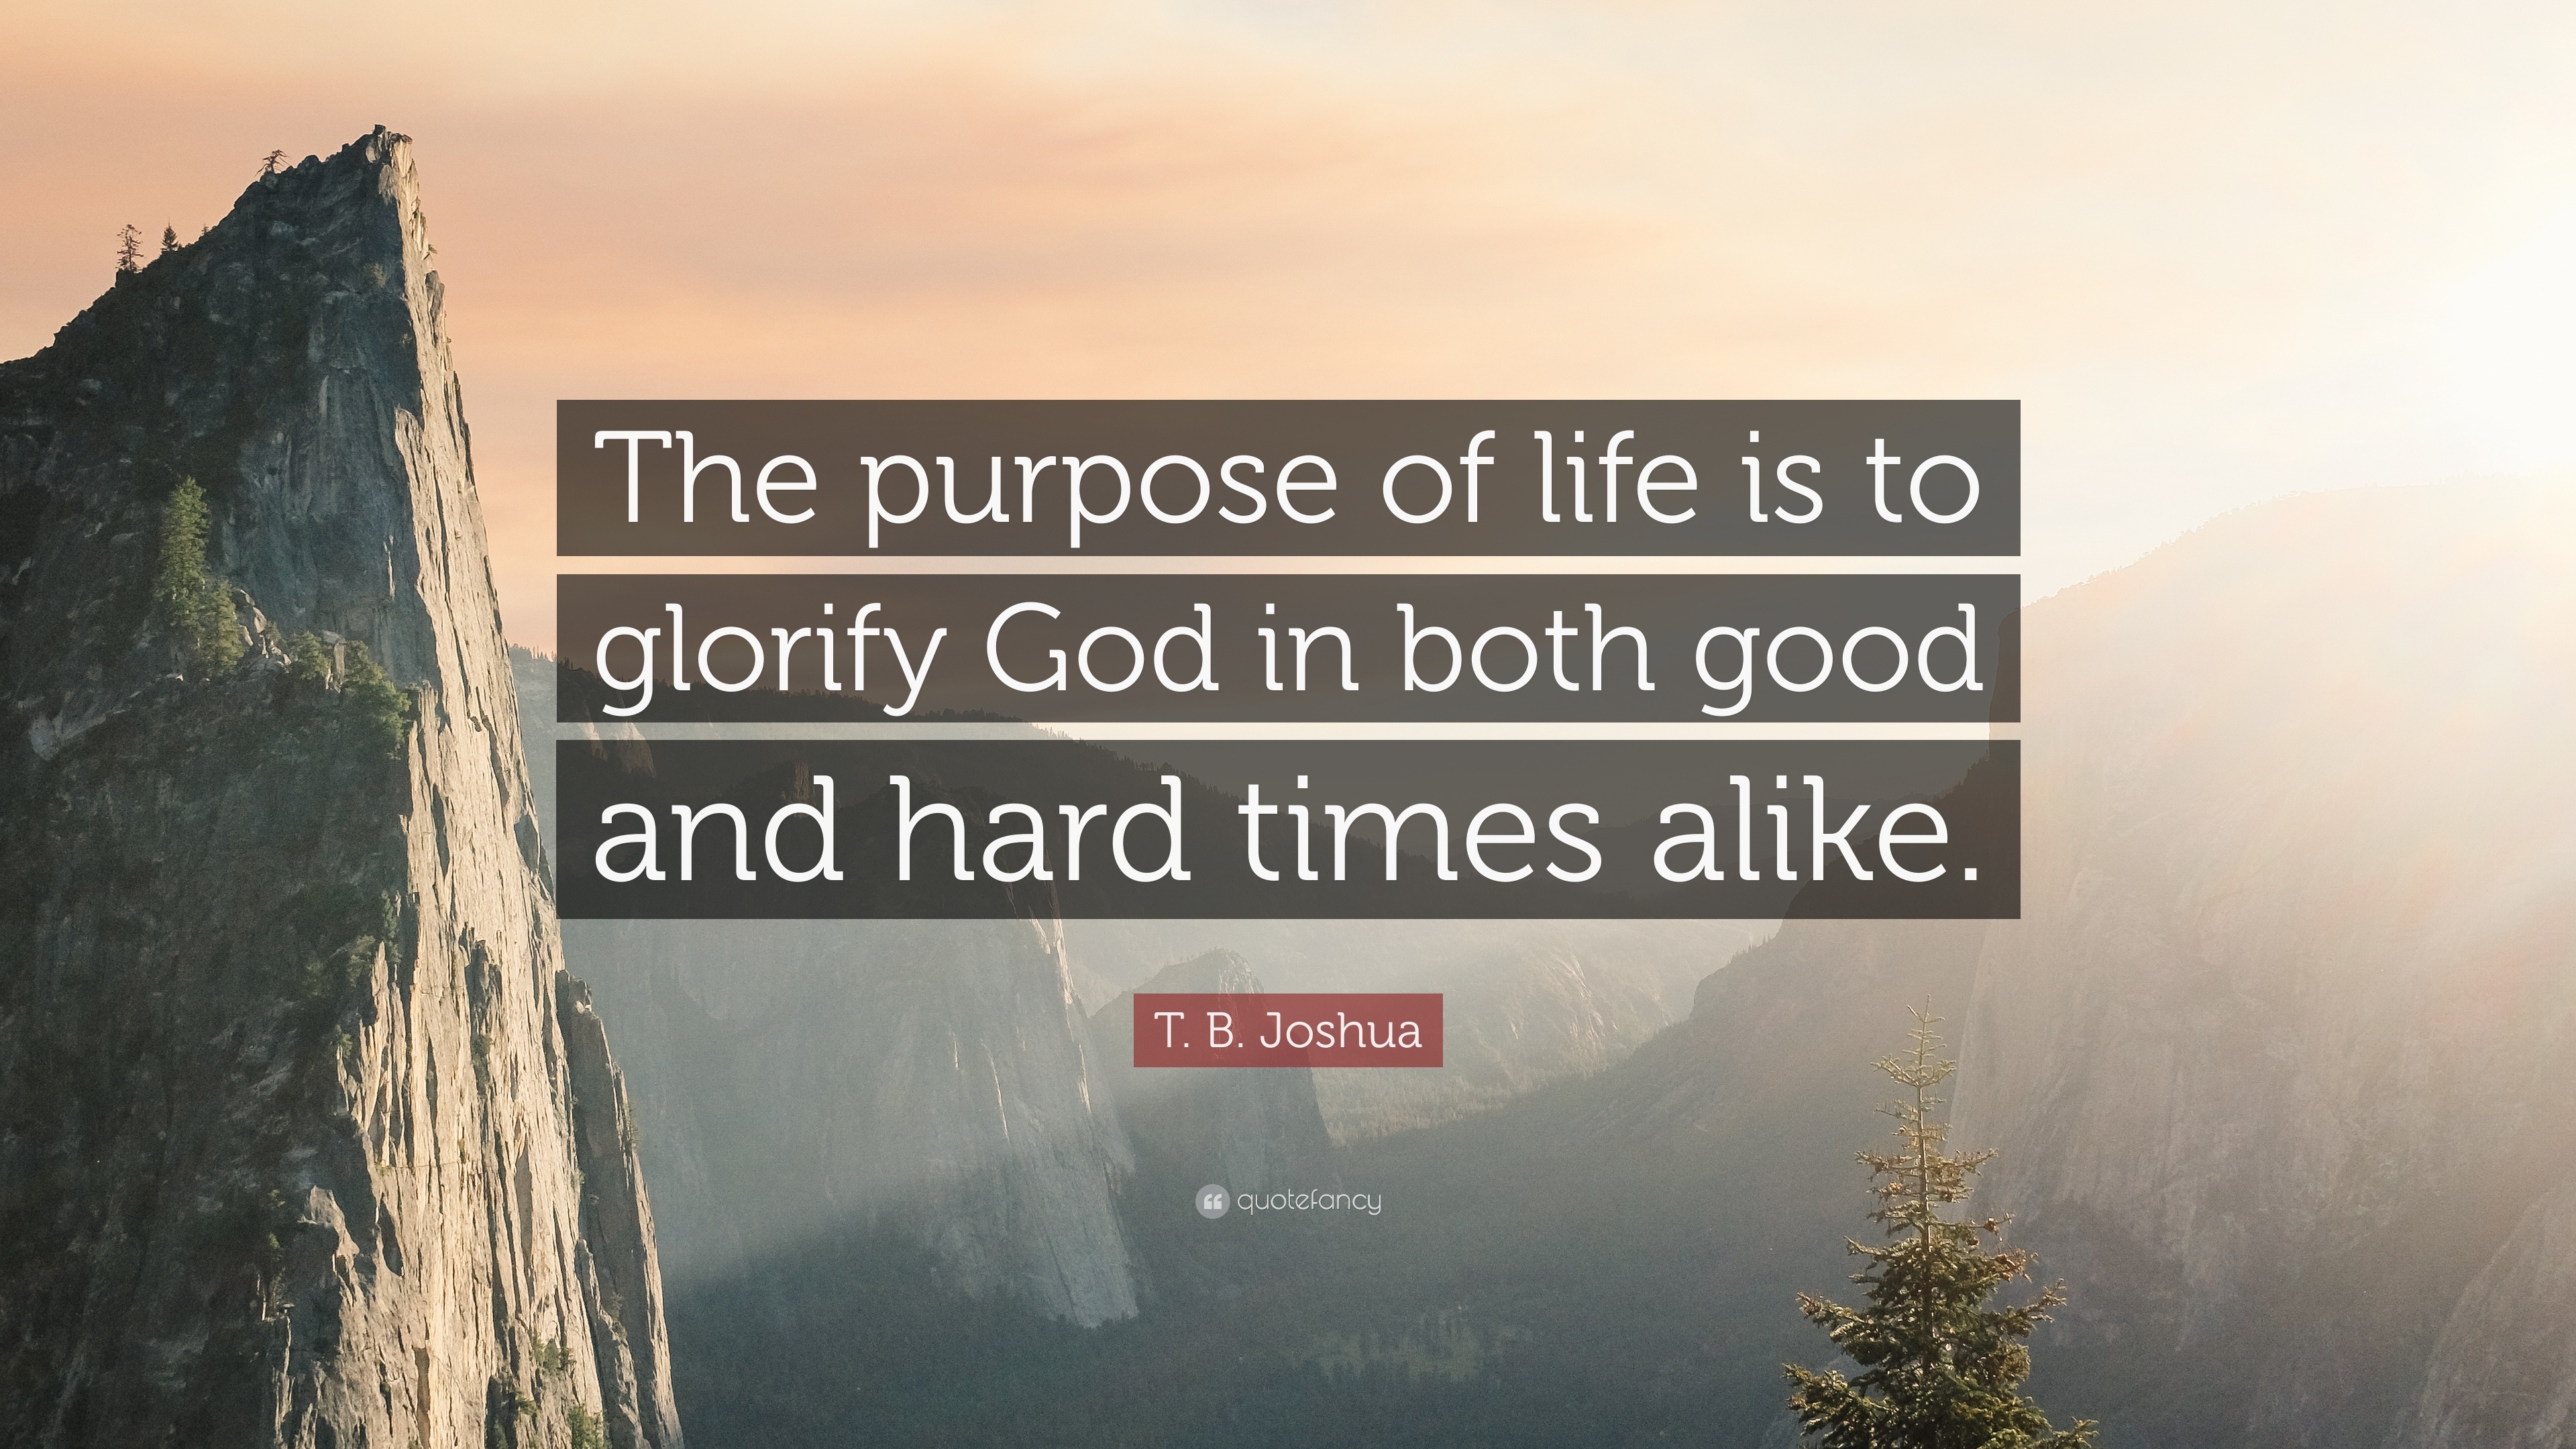 T B Joshua Quote “The purpose of life is to glorify God in both good